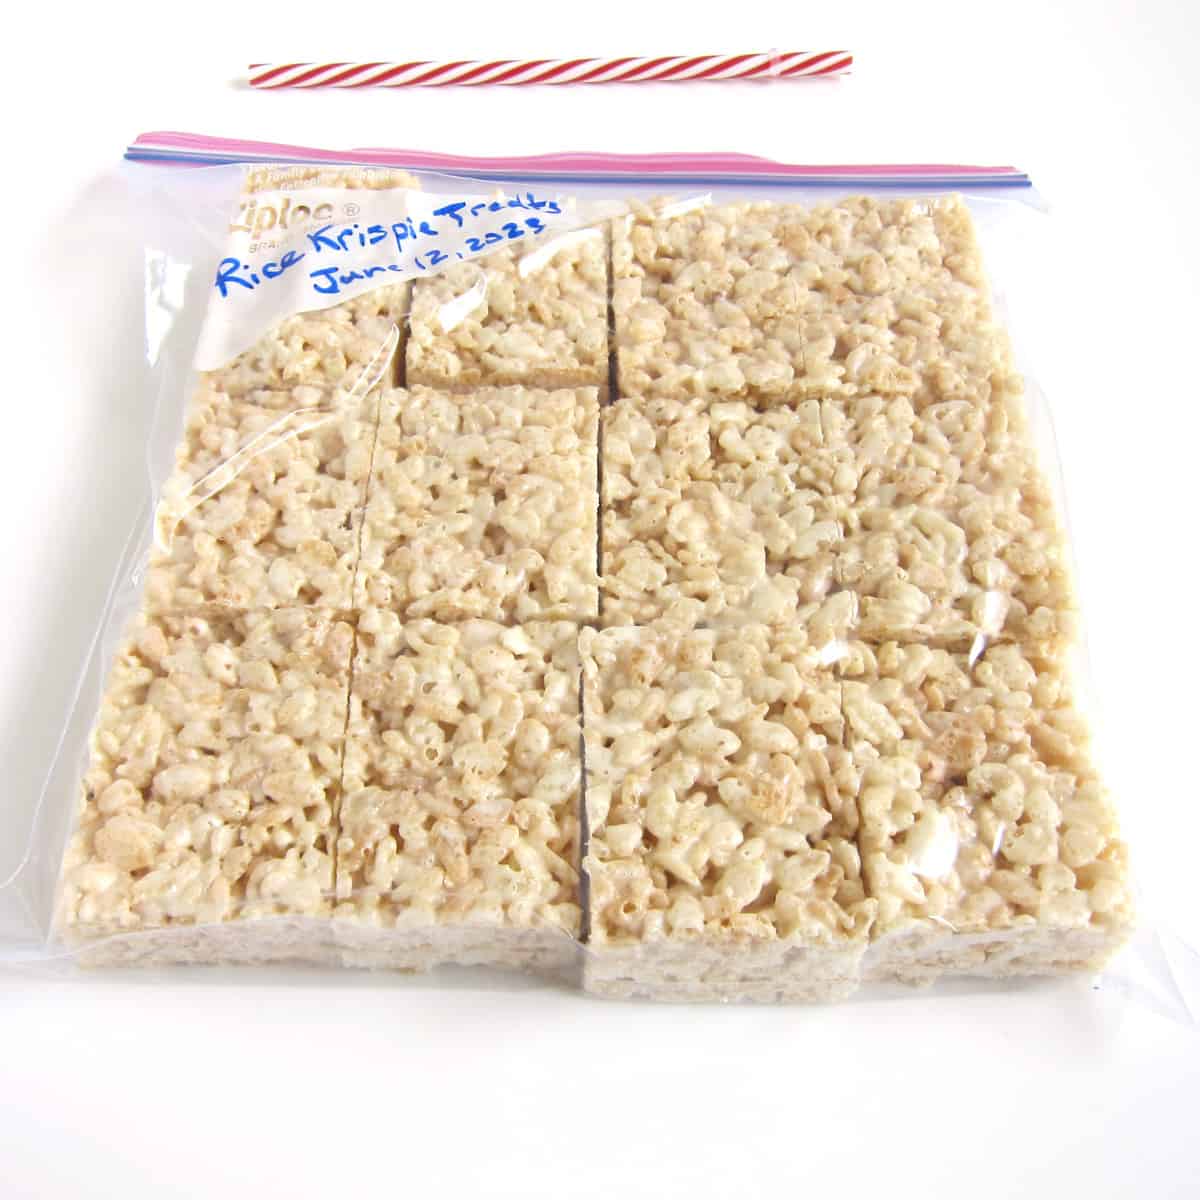 Rice Krispie Treats in a Zip-lock bag with the date written on the bag and a straw to remove air.